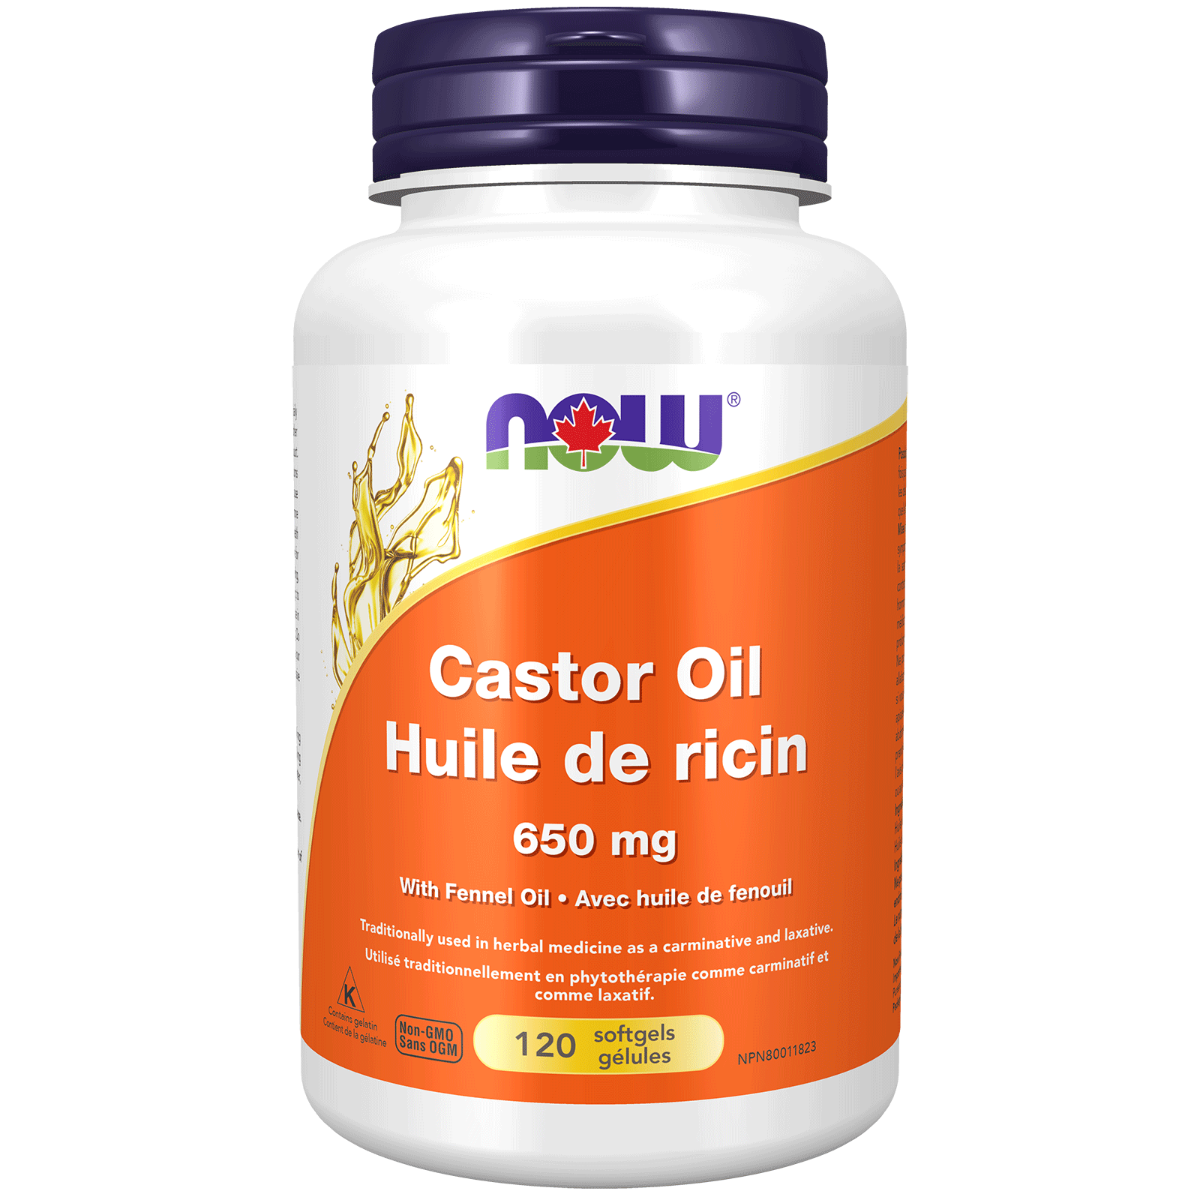 NOW Castor Oil 650 mg with Fennel Oil 120 Softgels Supplements at Village Vitamin Store